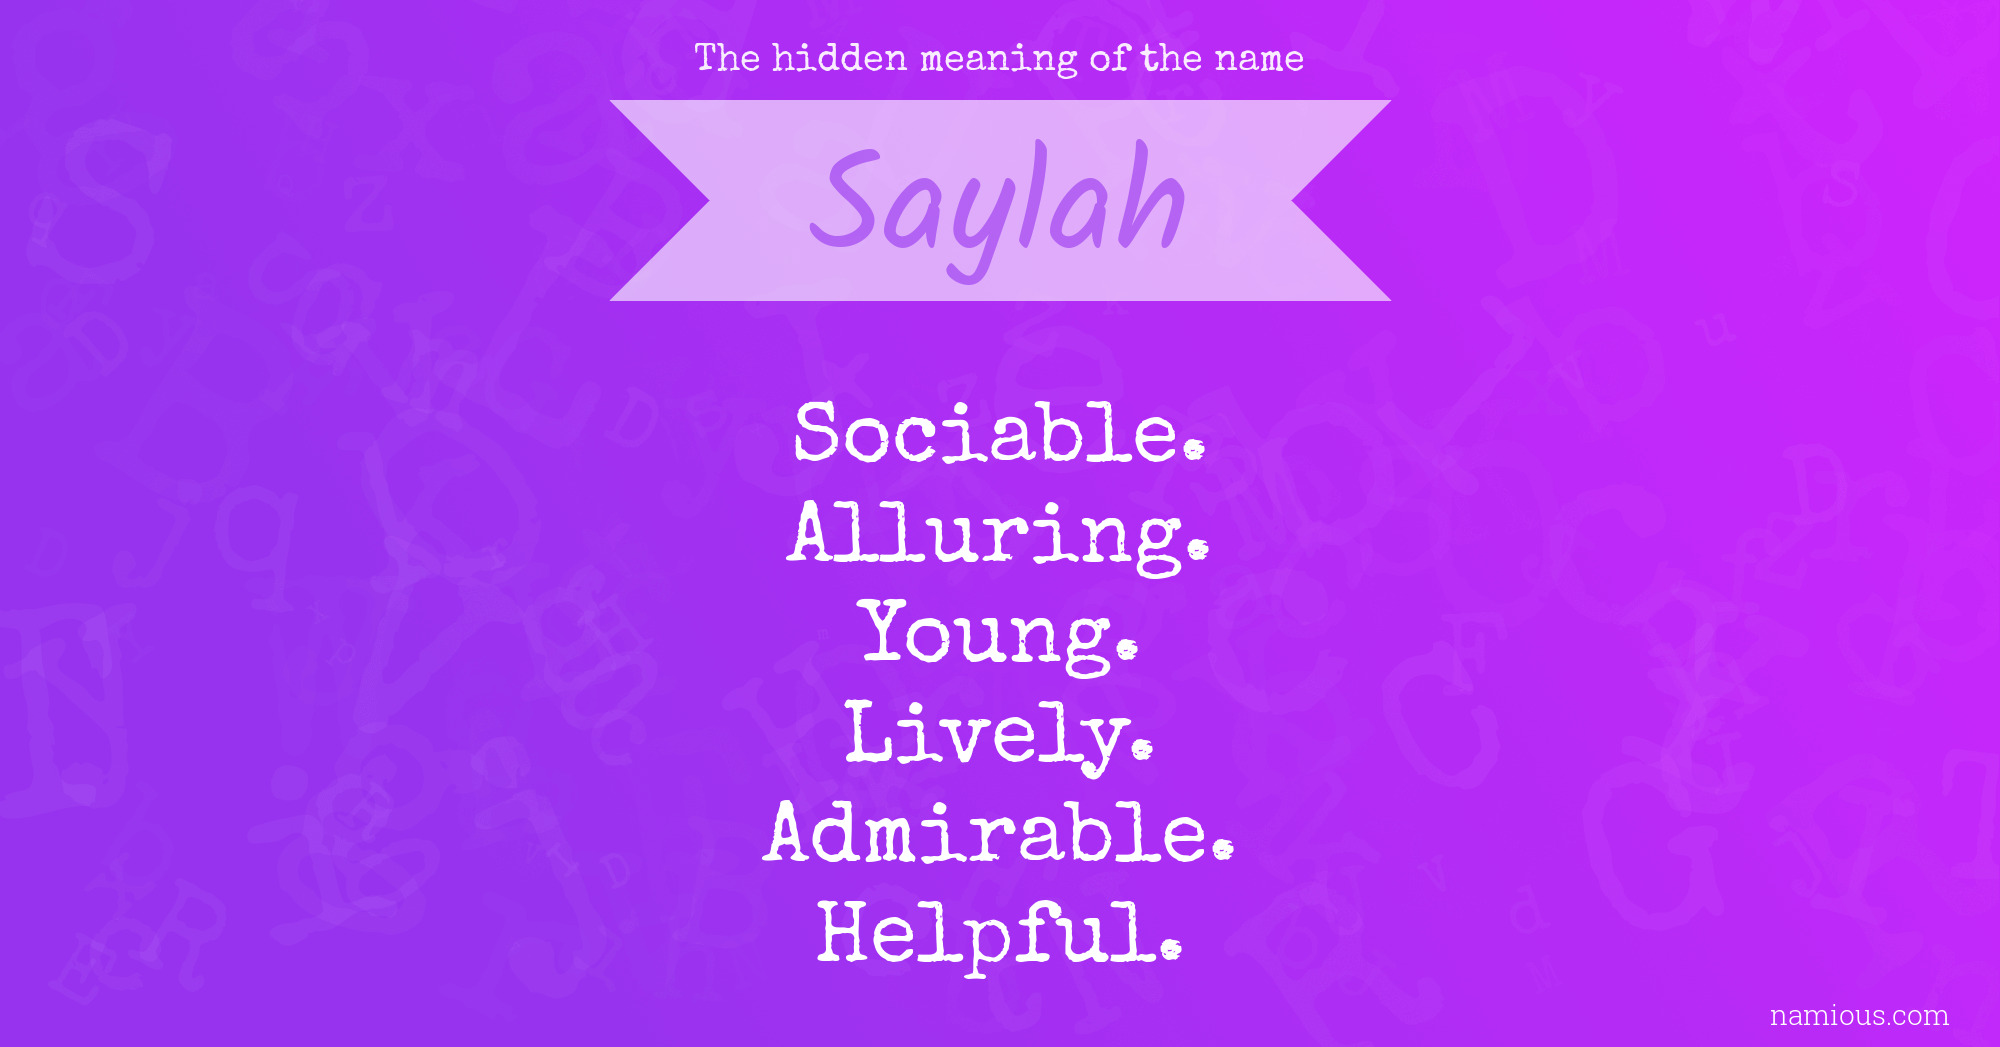 The hidden meaning of the name Saylah